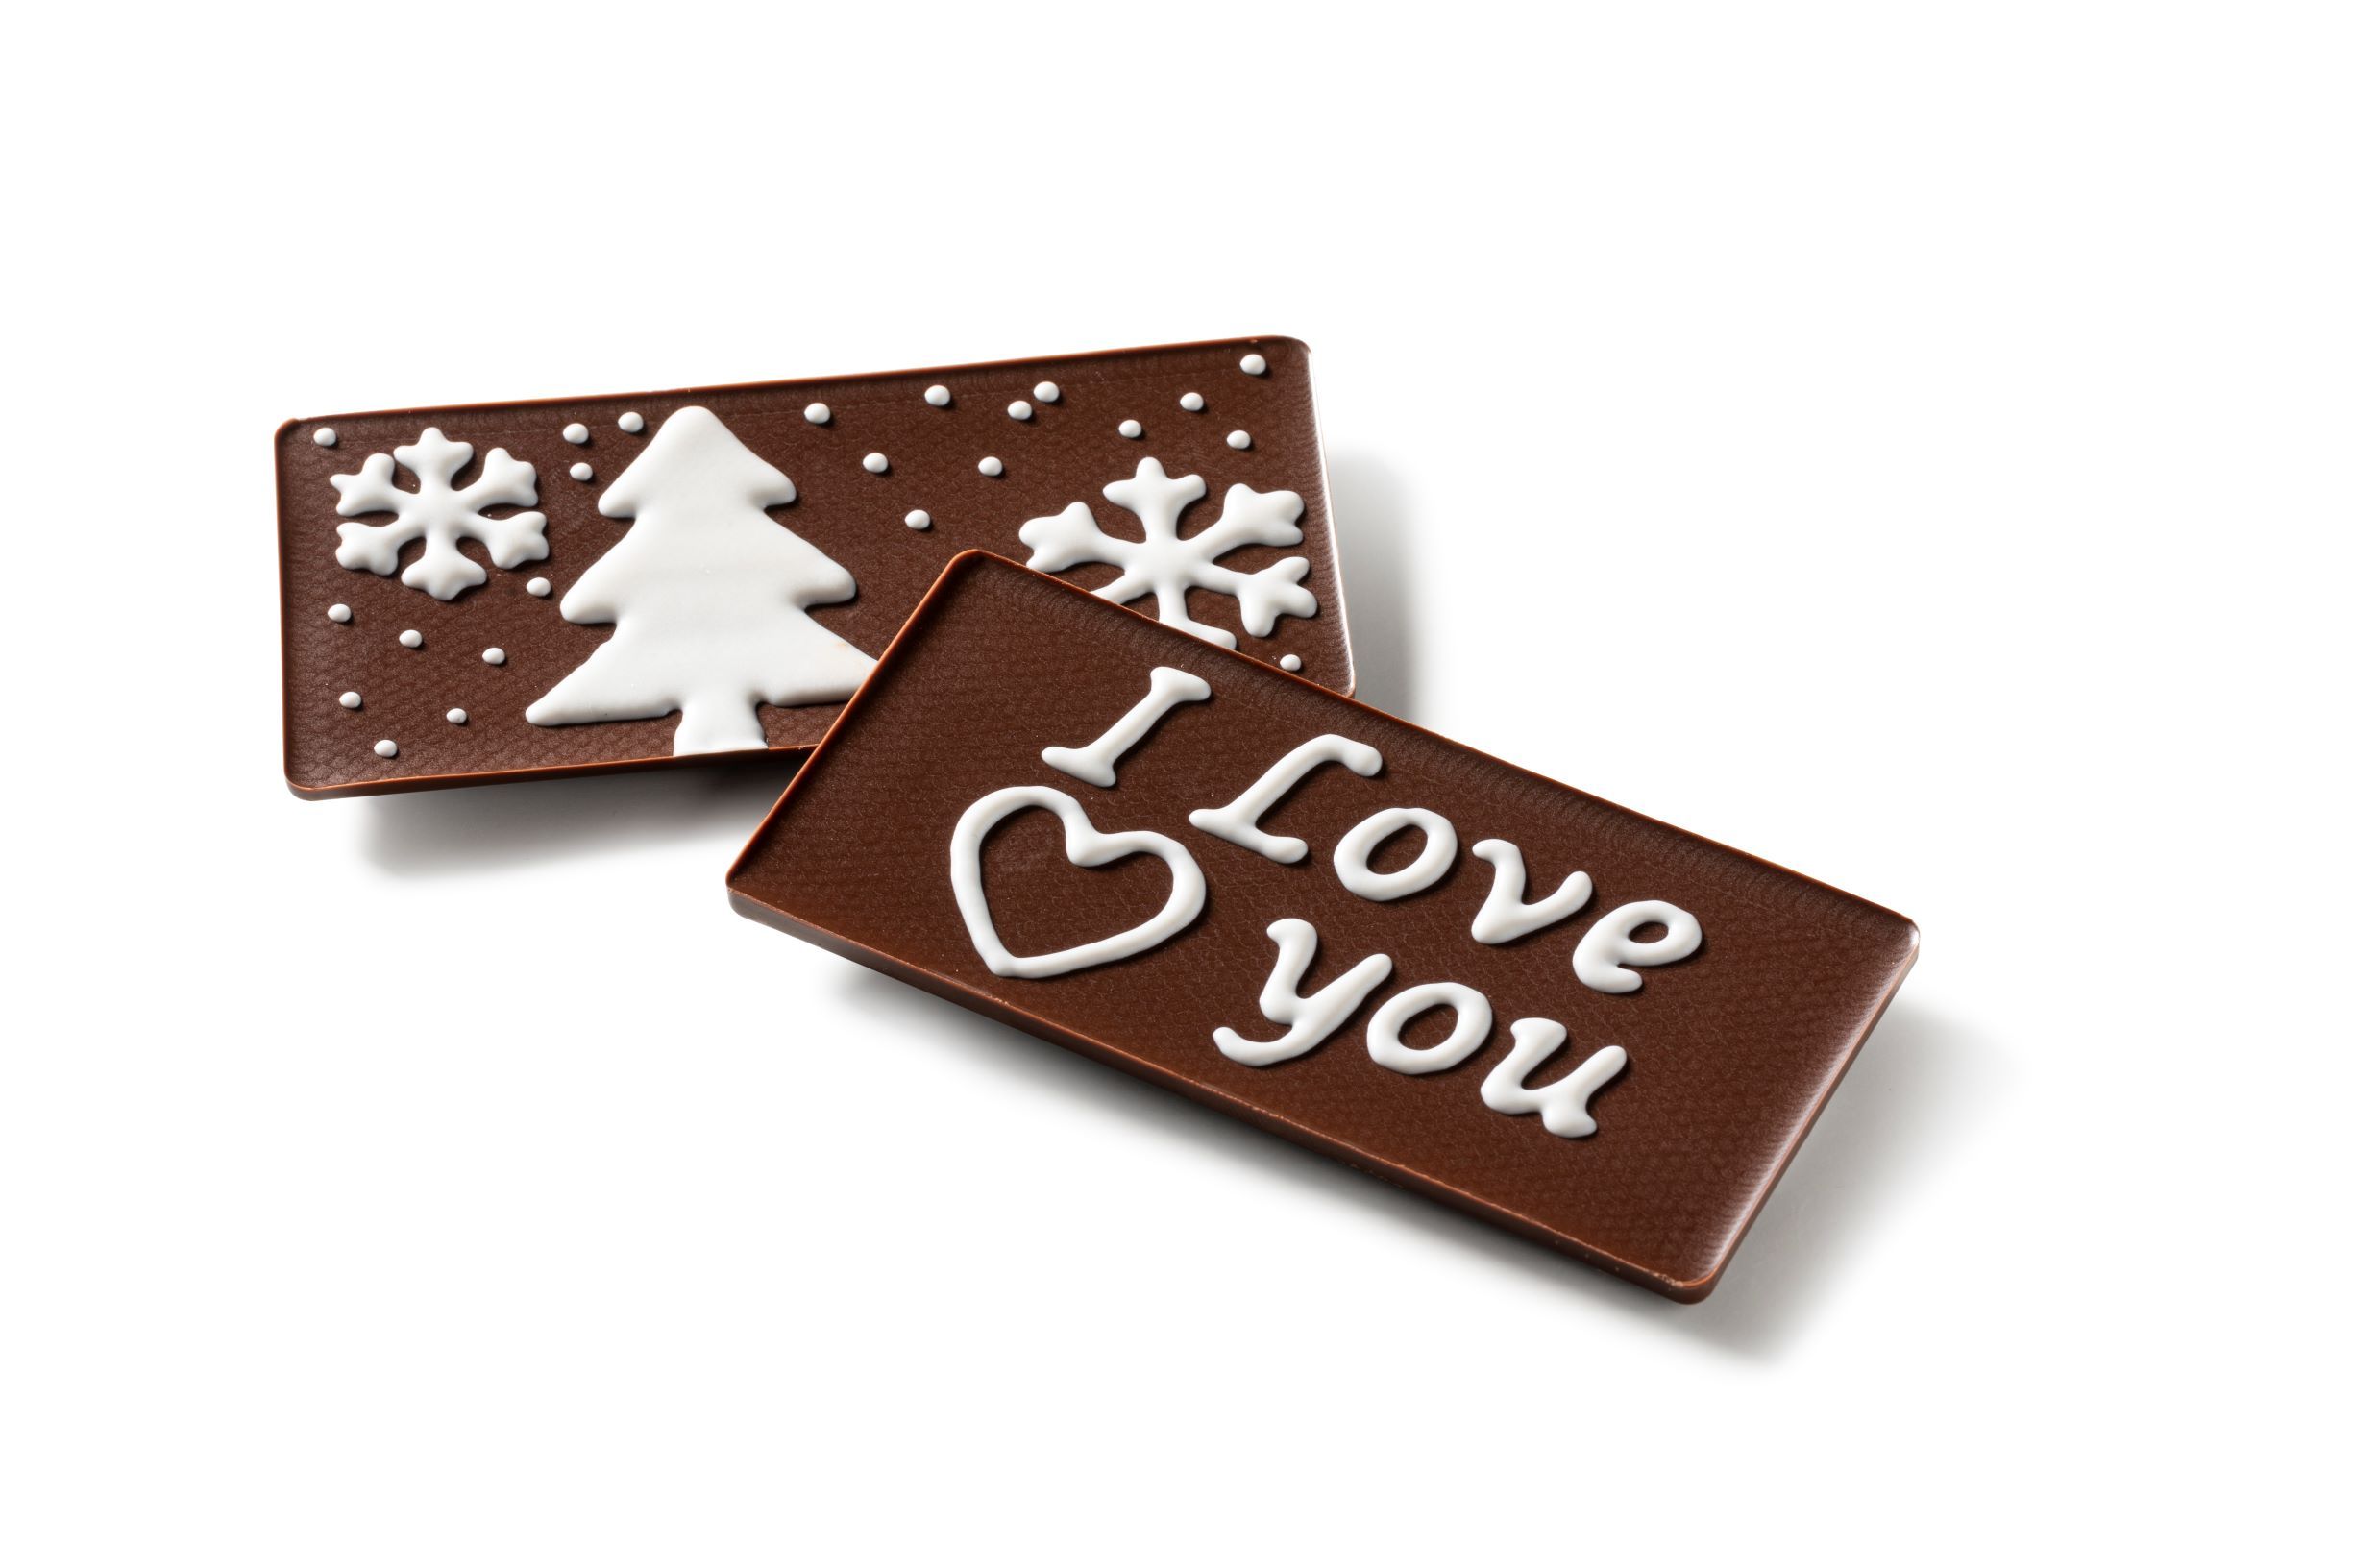 Two milk chocolate bars with white chocolate decorations made with FoodJet chocolate depositor